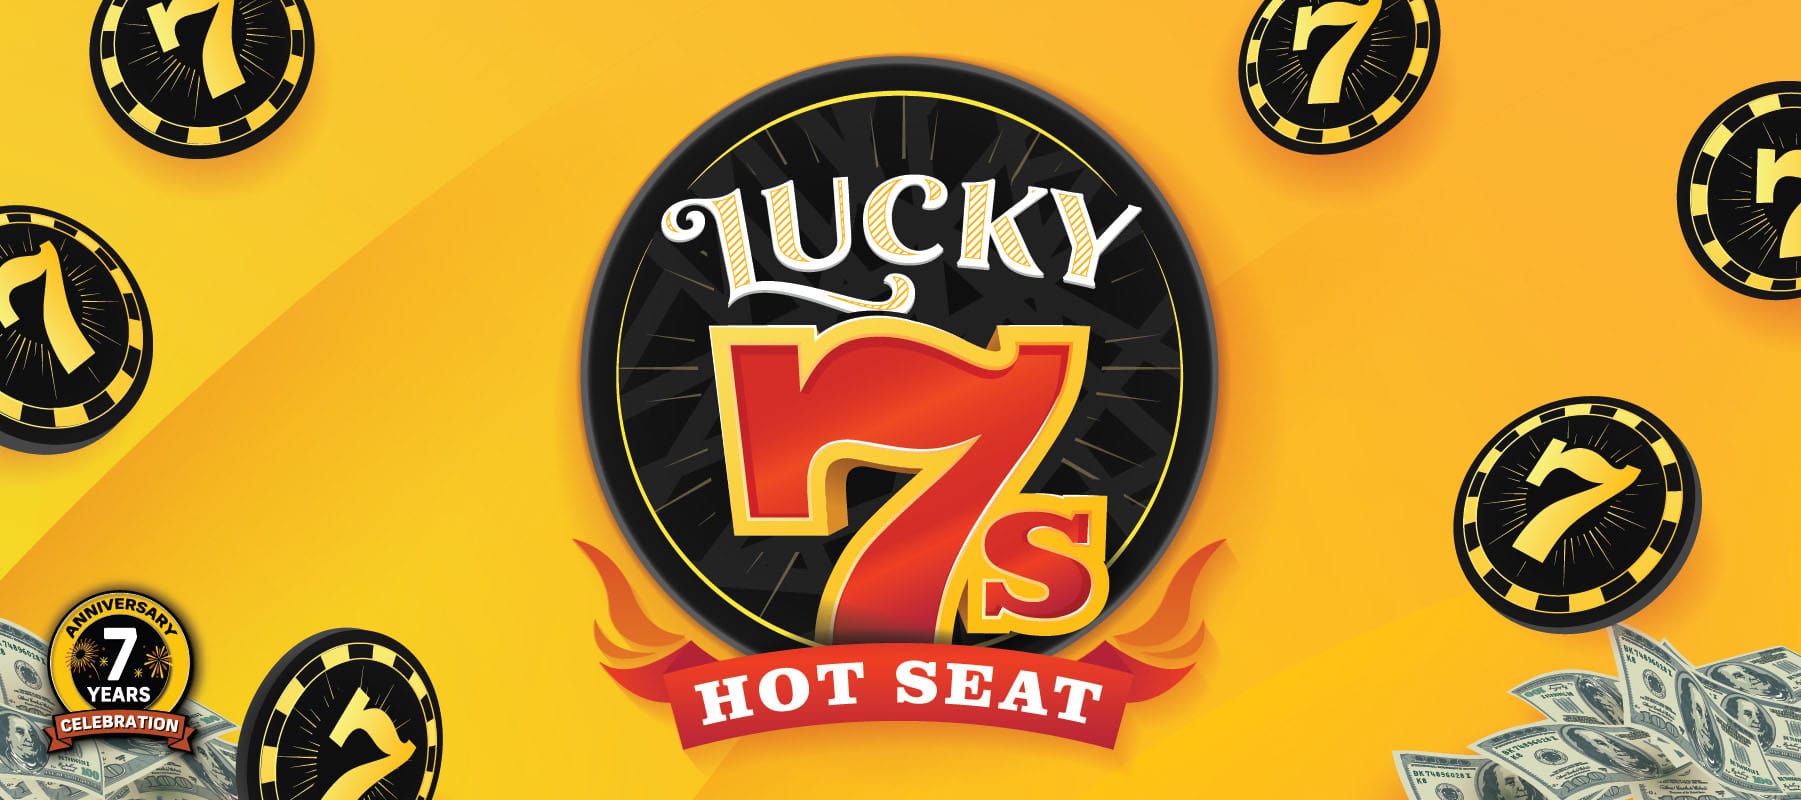 Lucky 7s Hot Seat